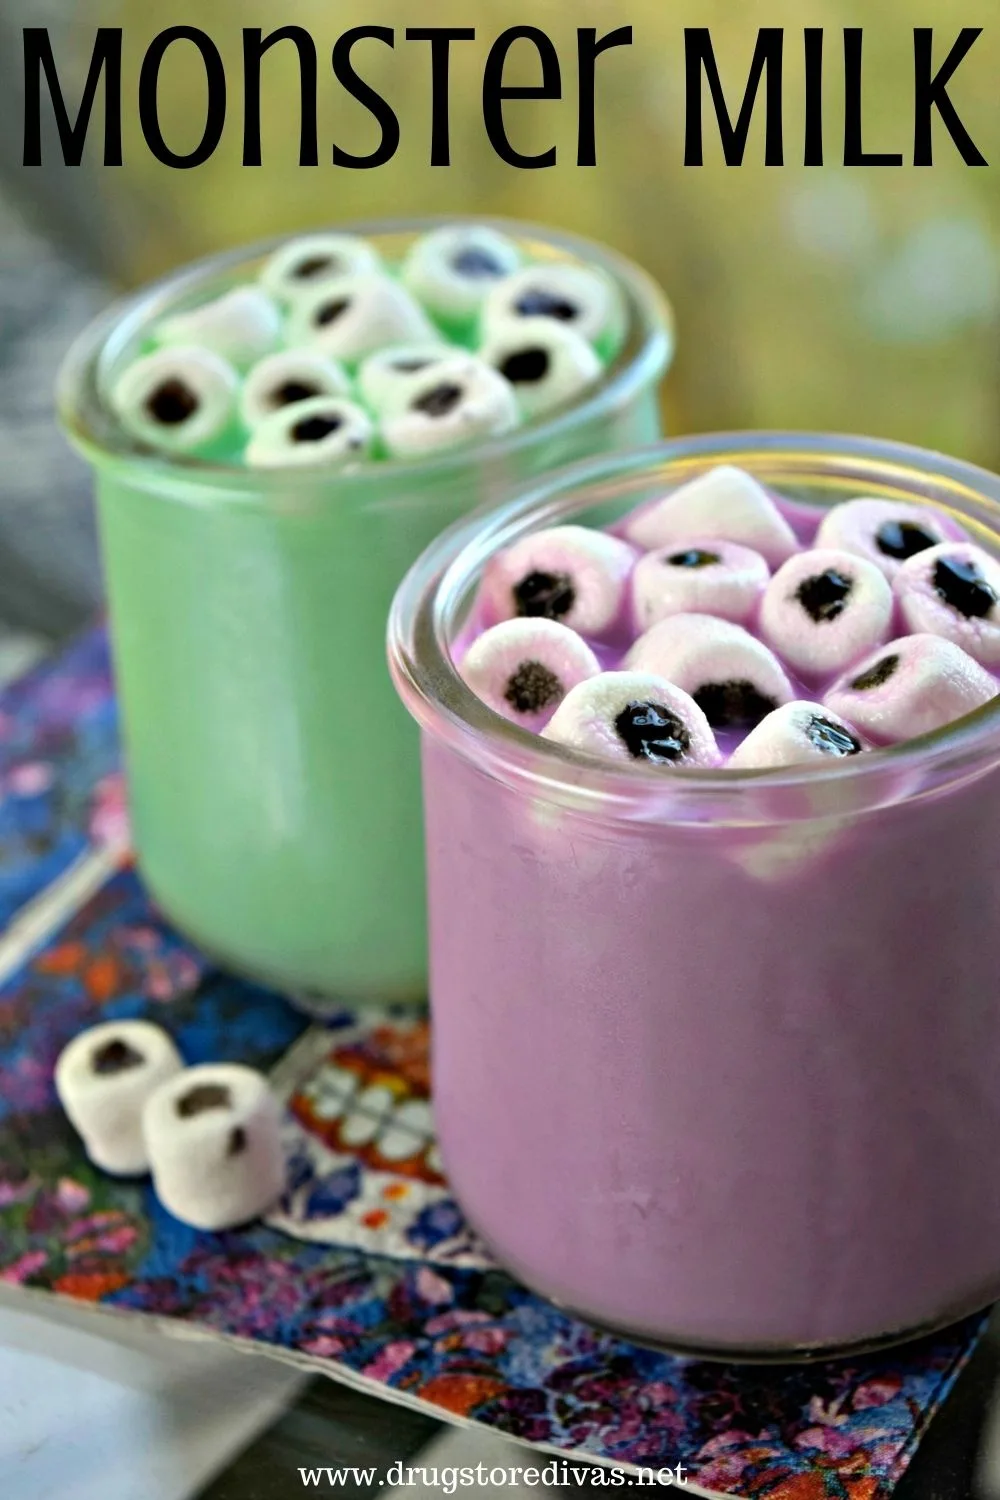 A cup of green milk with homemade marshmallow eyeballs and a cup of green milk with homemade marshmallow eyeballs on a napkin.